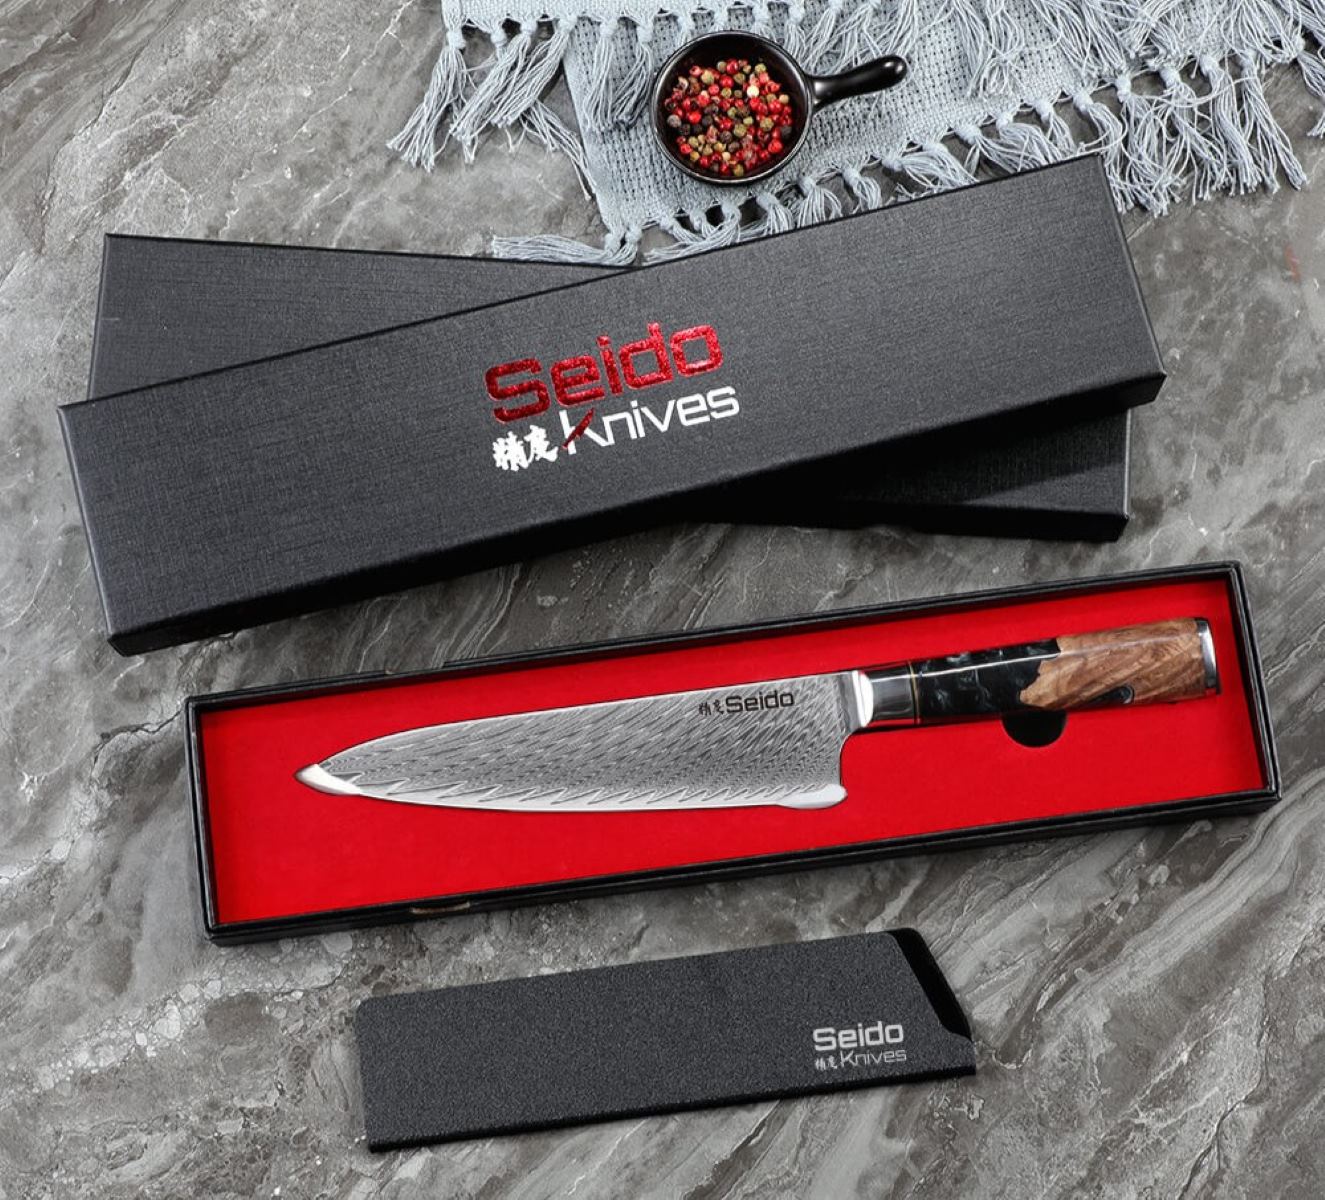 upgrade-your-cooking-game-with-the-seido-gyuto-executive-chef-knife